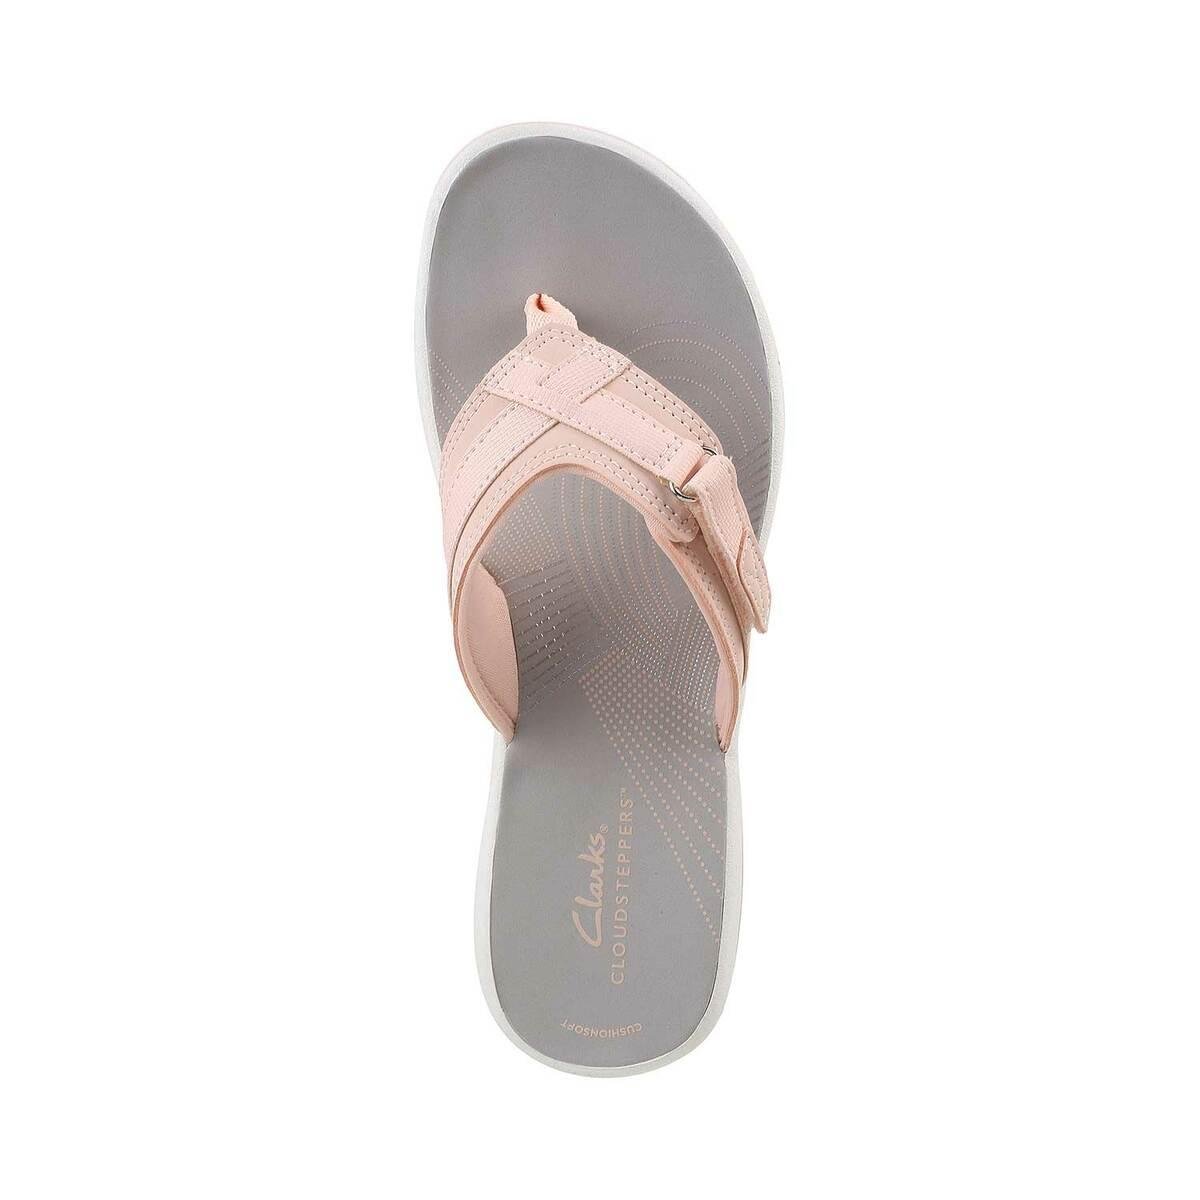 Clarks Active Air Casual Sandals for Women for sale | eBay